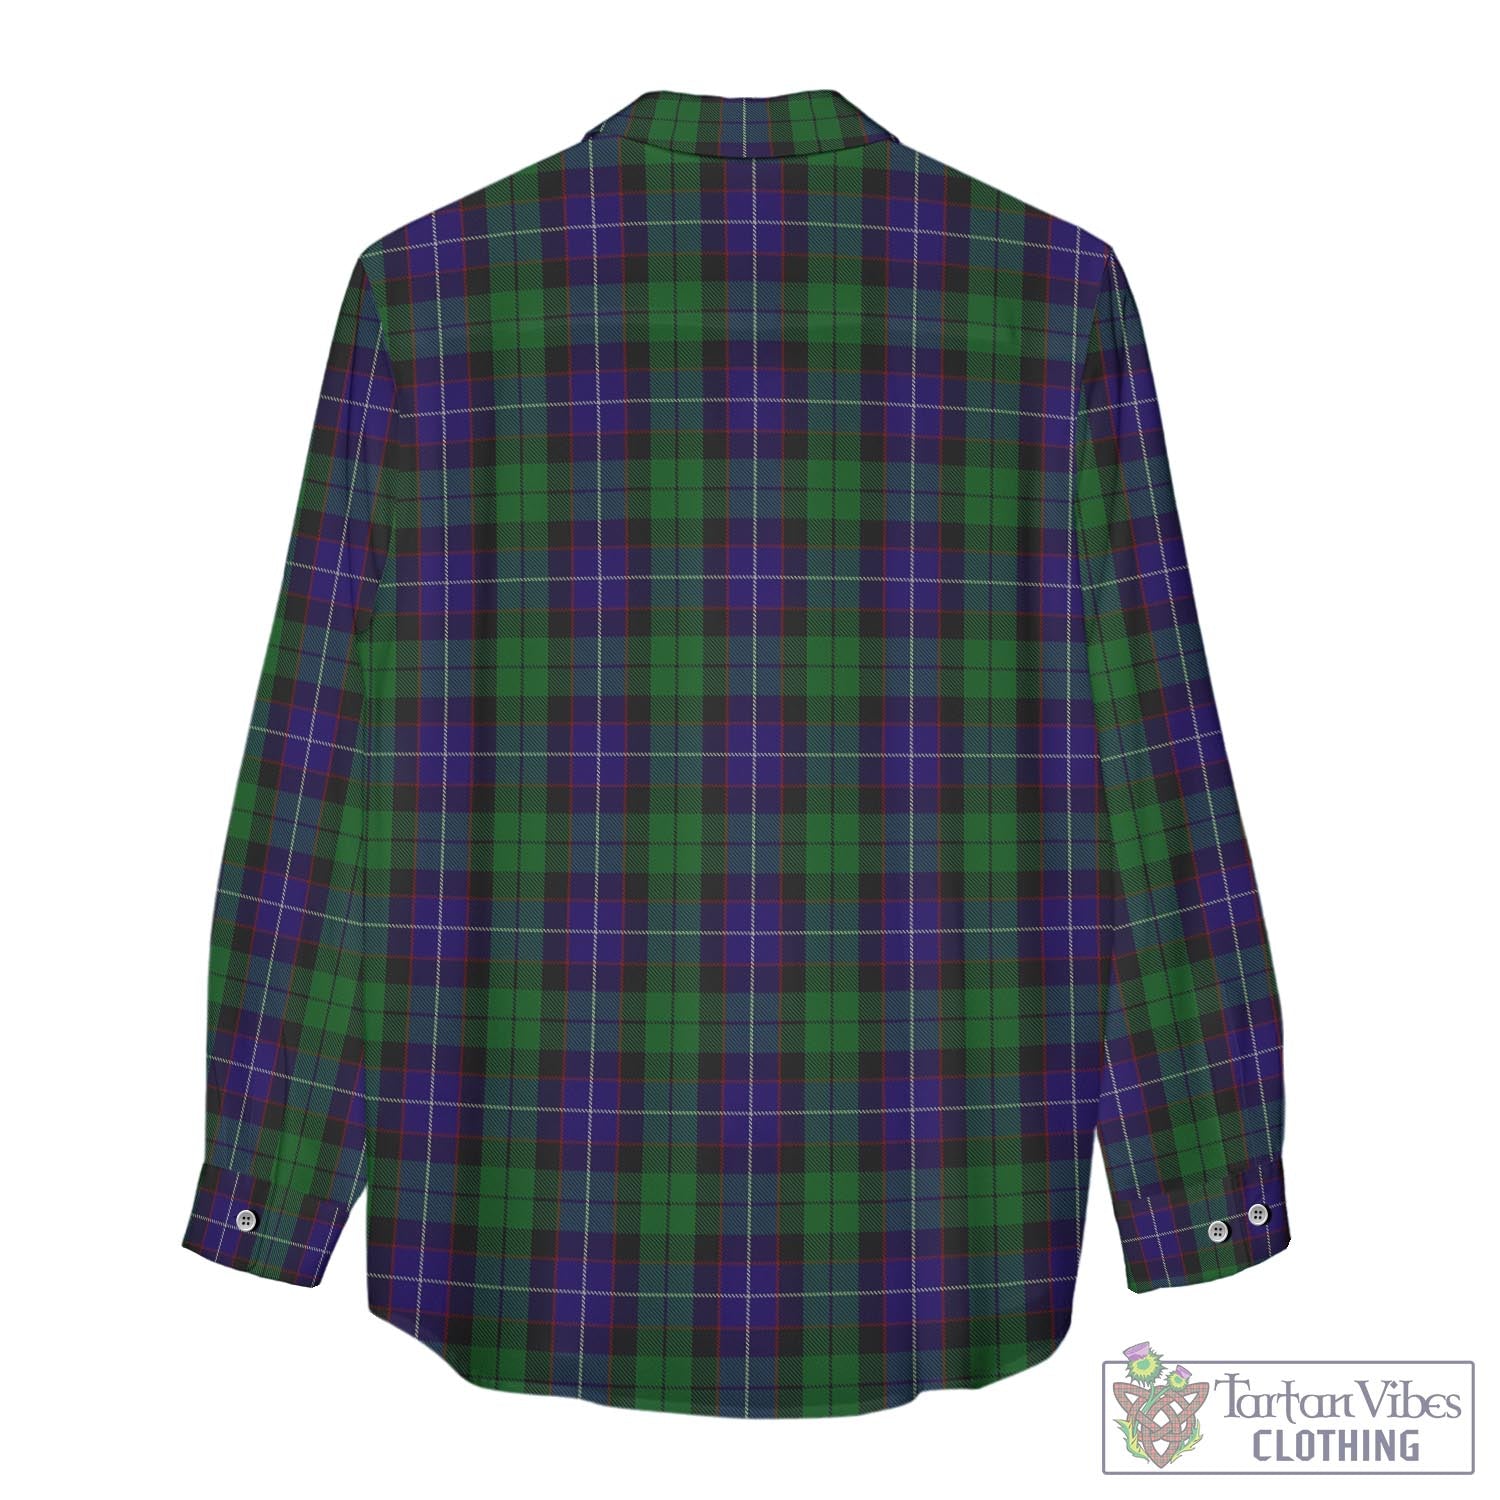 Tartan Vibes Clothing Mitchell Tartan Womens Casual Shirt with Family Crest